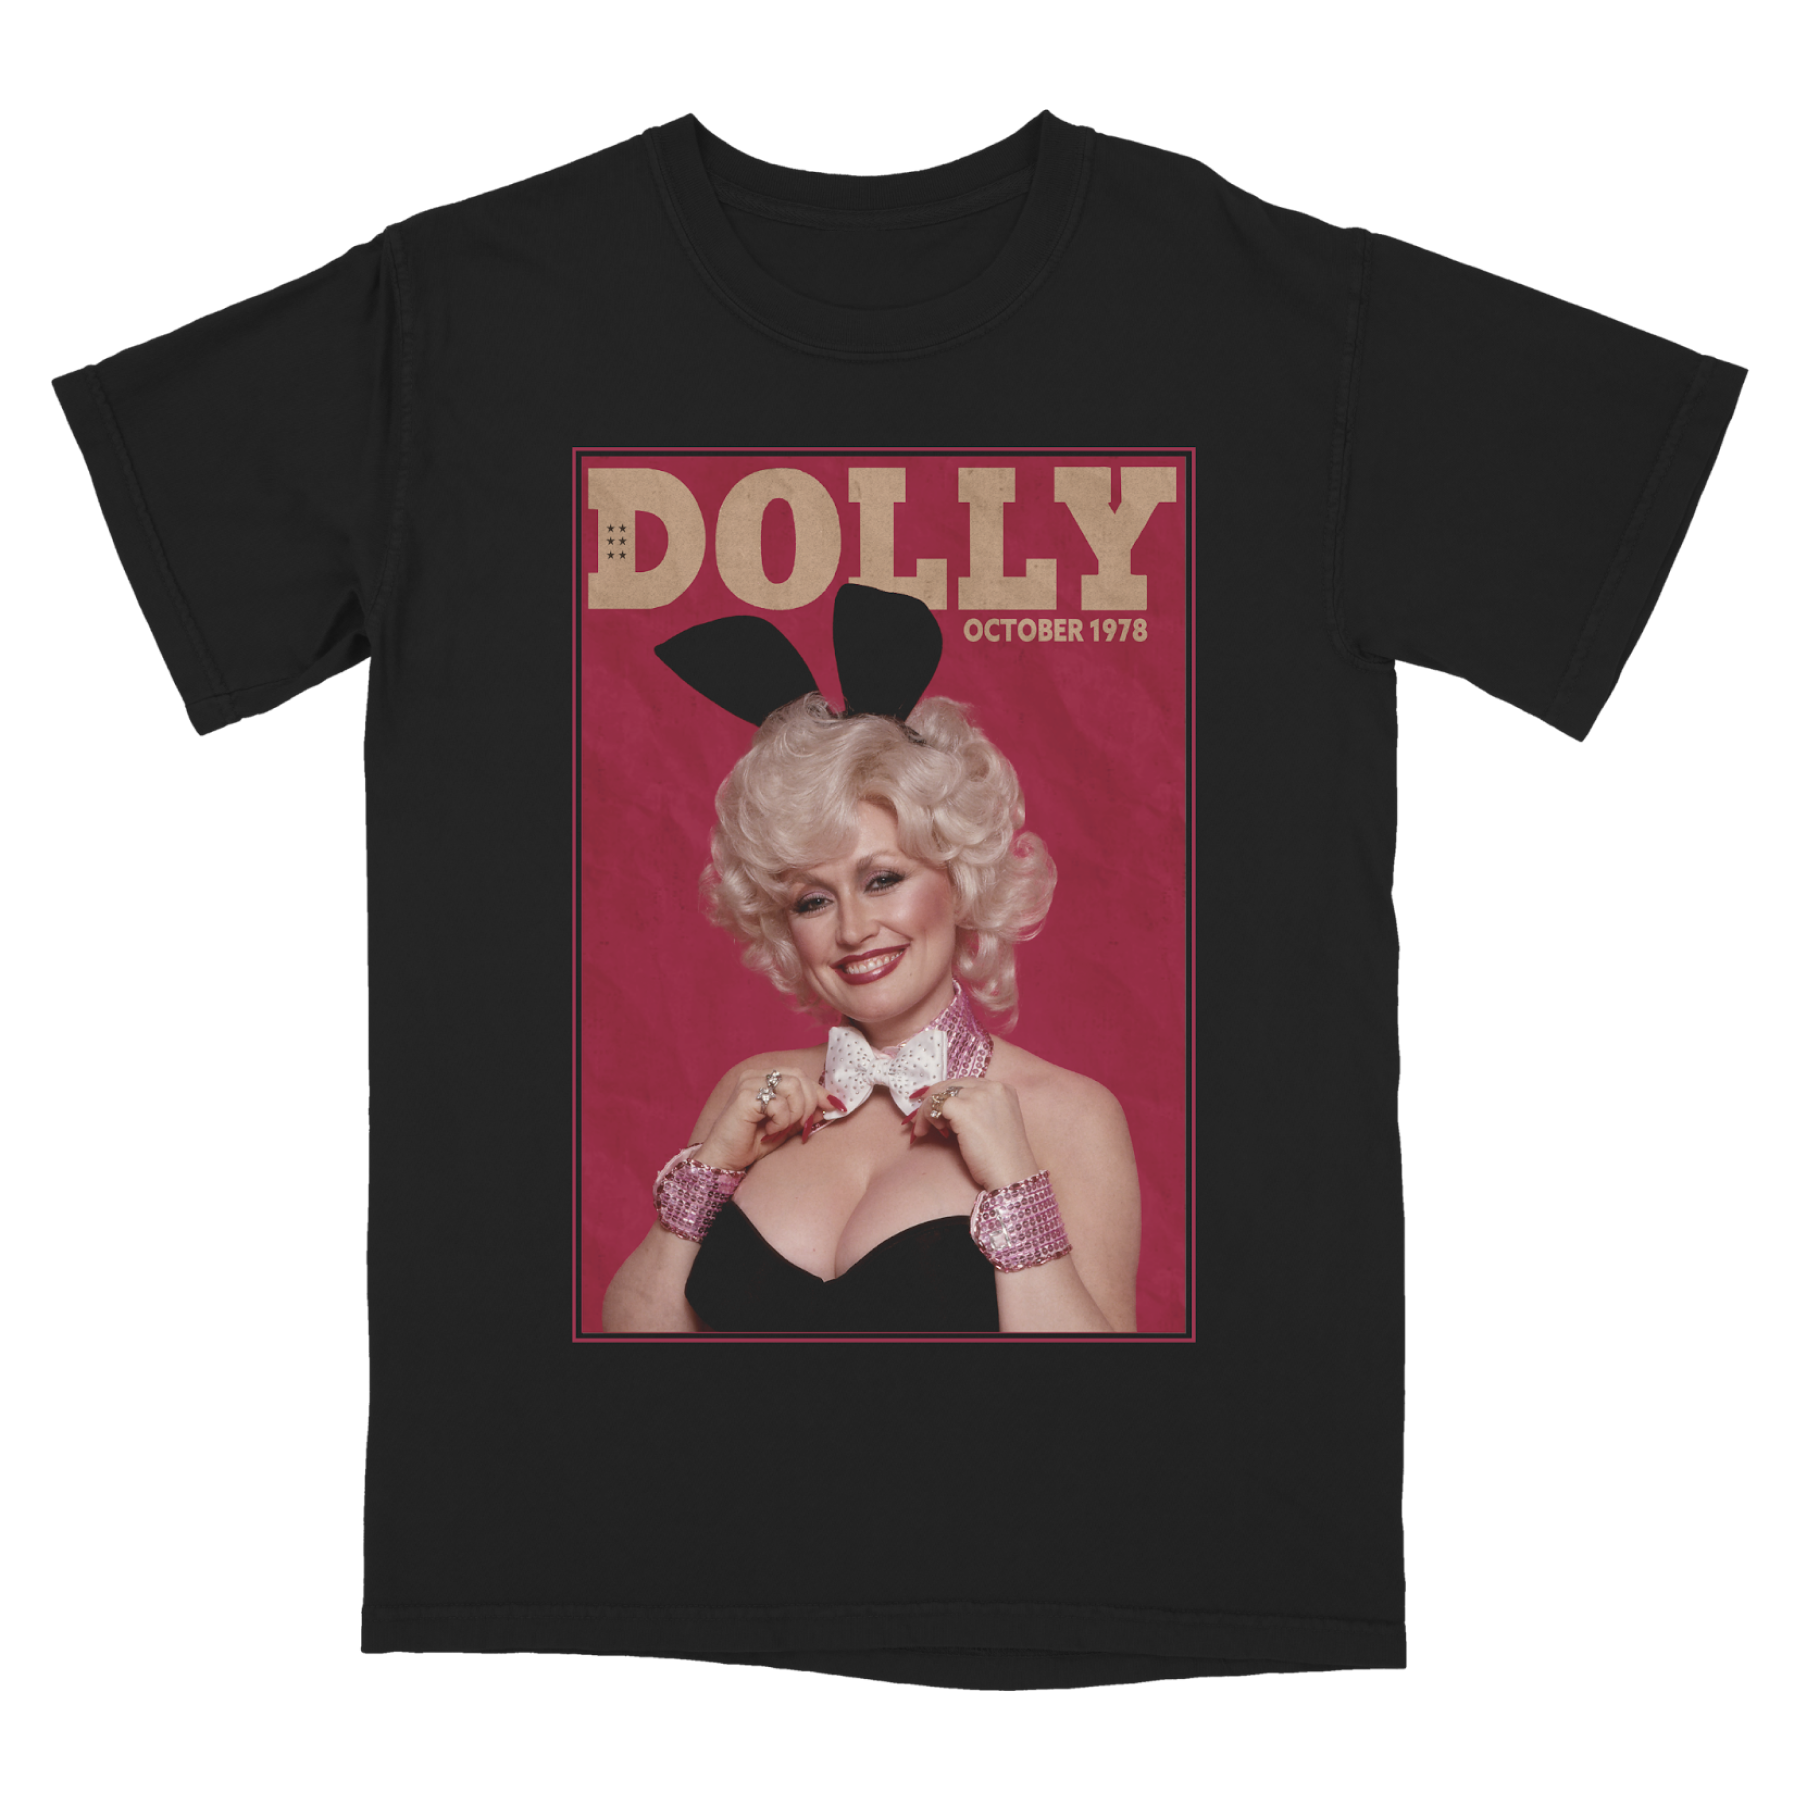 Official Dolly Parton Merchandise. 100% black cotton t-shirt with the original Dolly Parton 1978 Playboy magazine cover printed on the front.